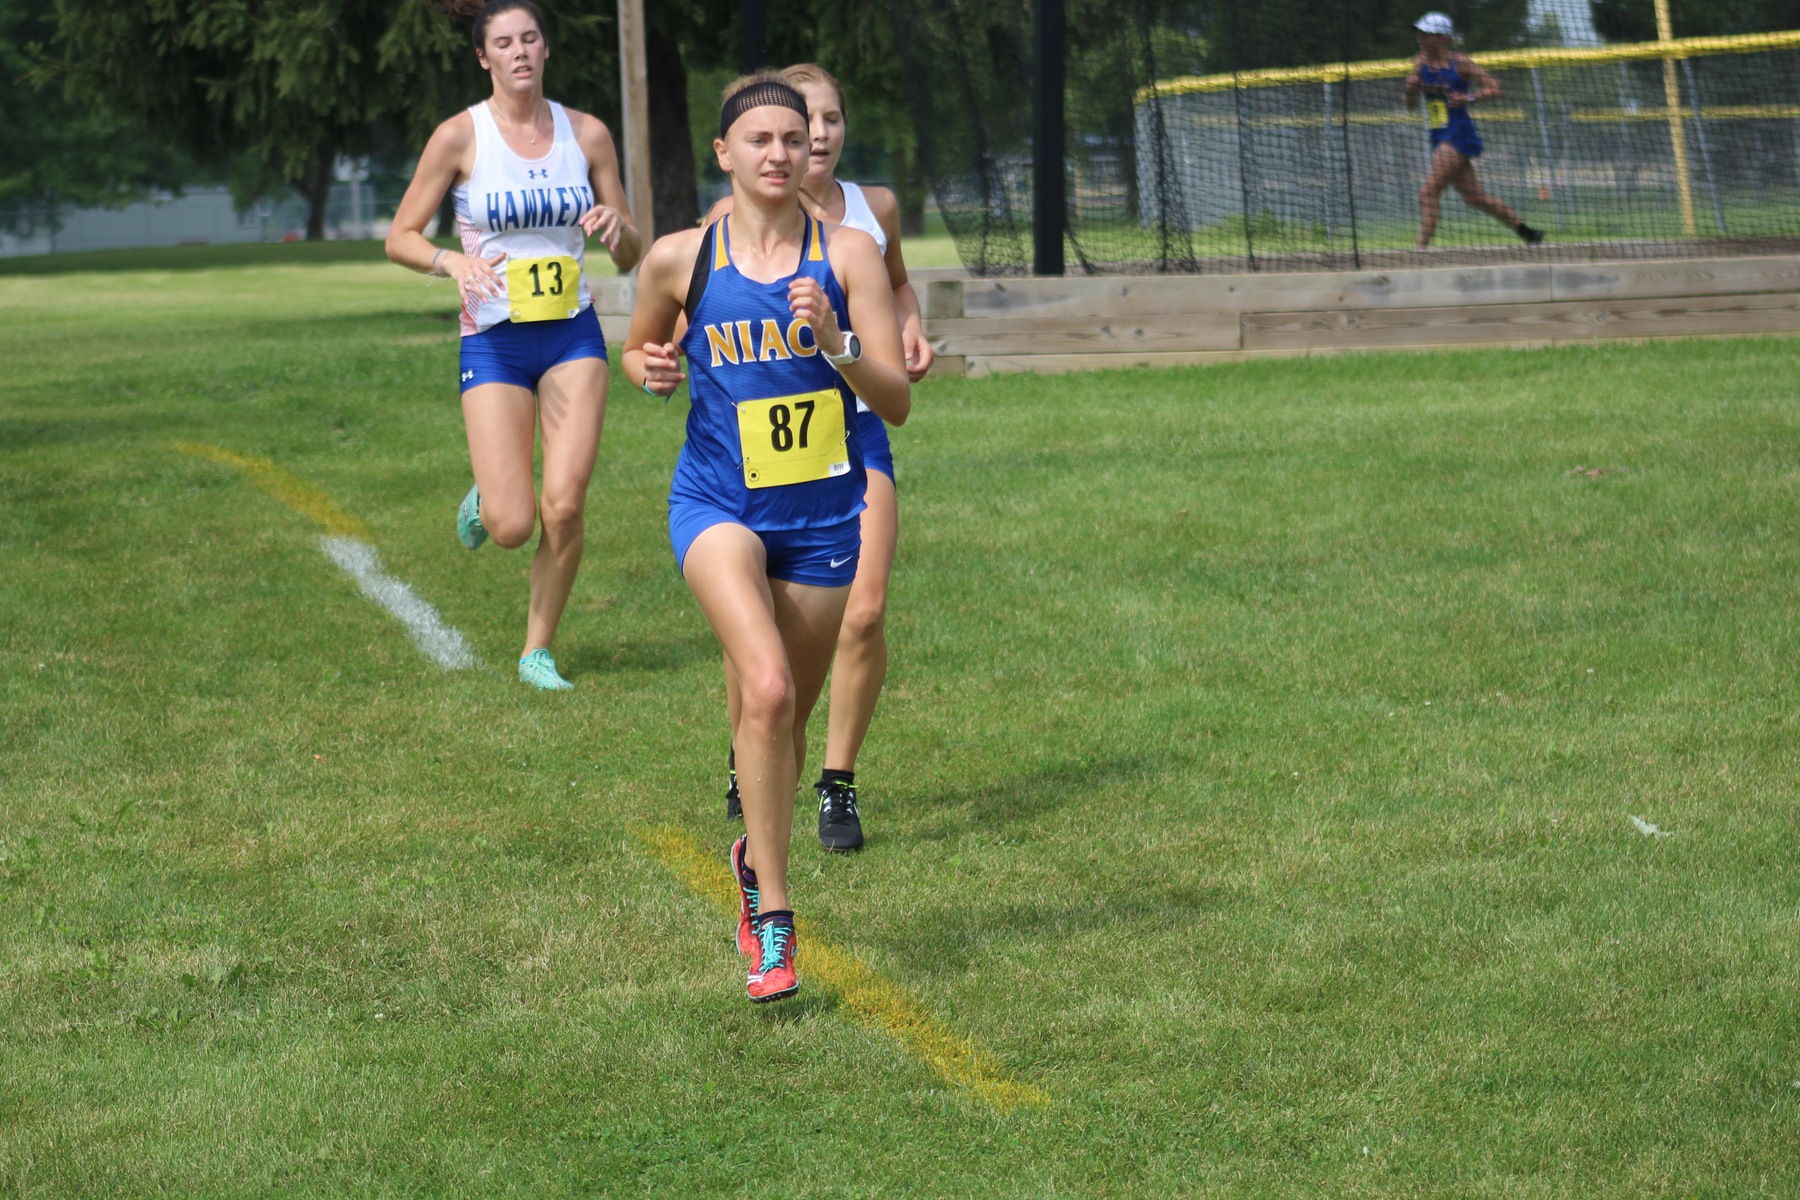 NIACC freshman Emma Davison runs to a seventh-place finish at the regional time trial on Saturday in Davenport.